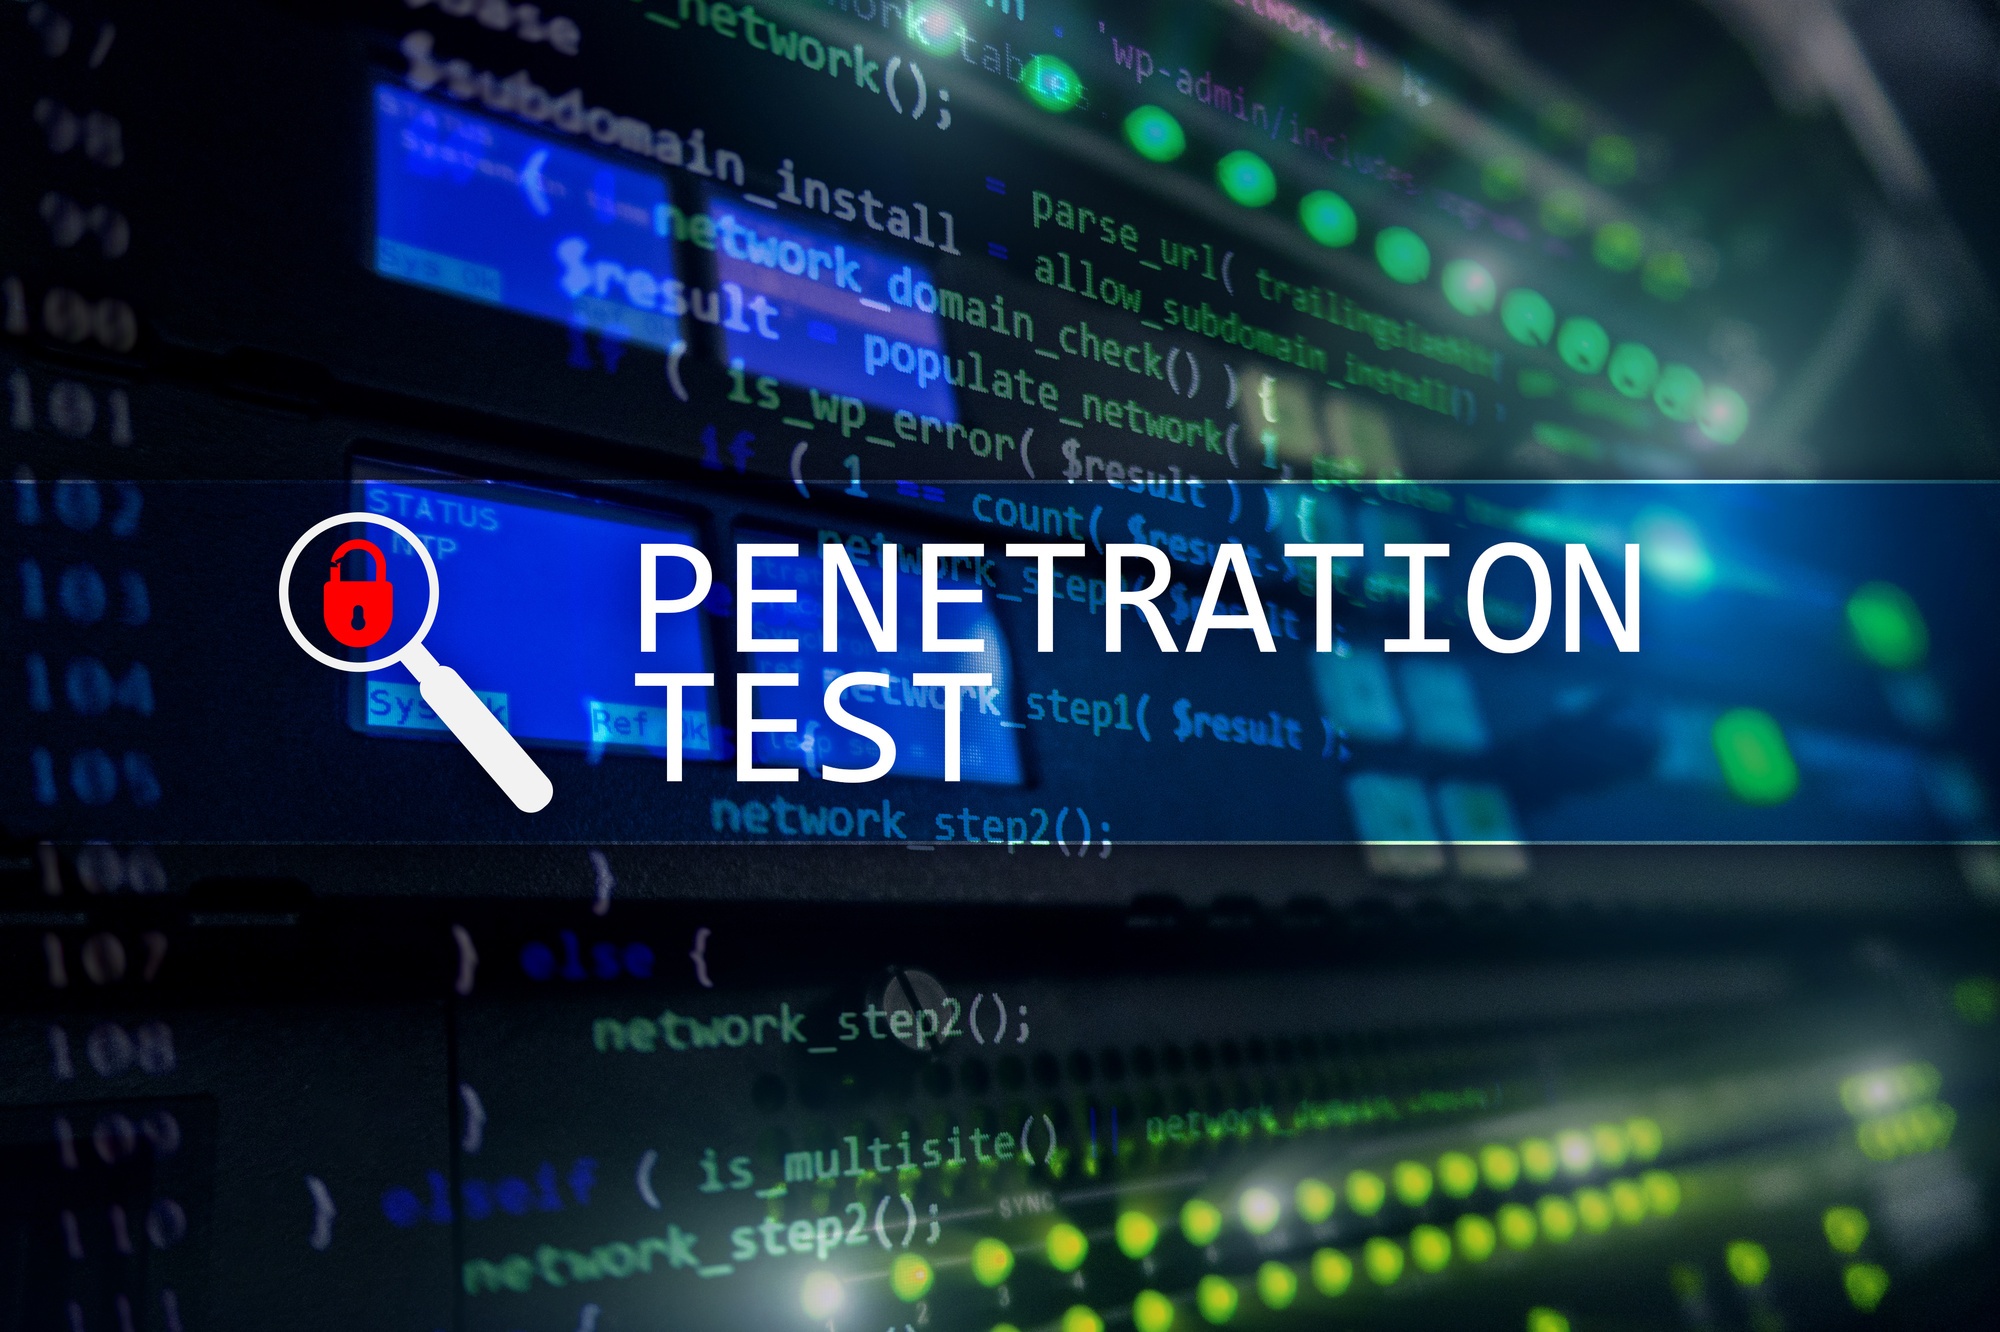 physical penetration testing price